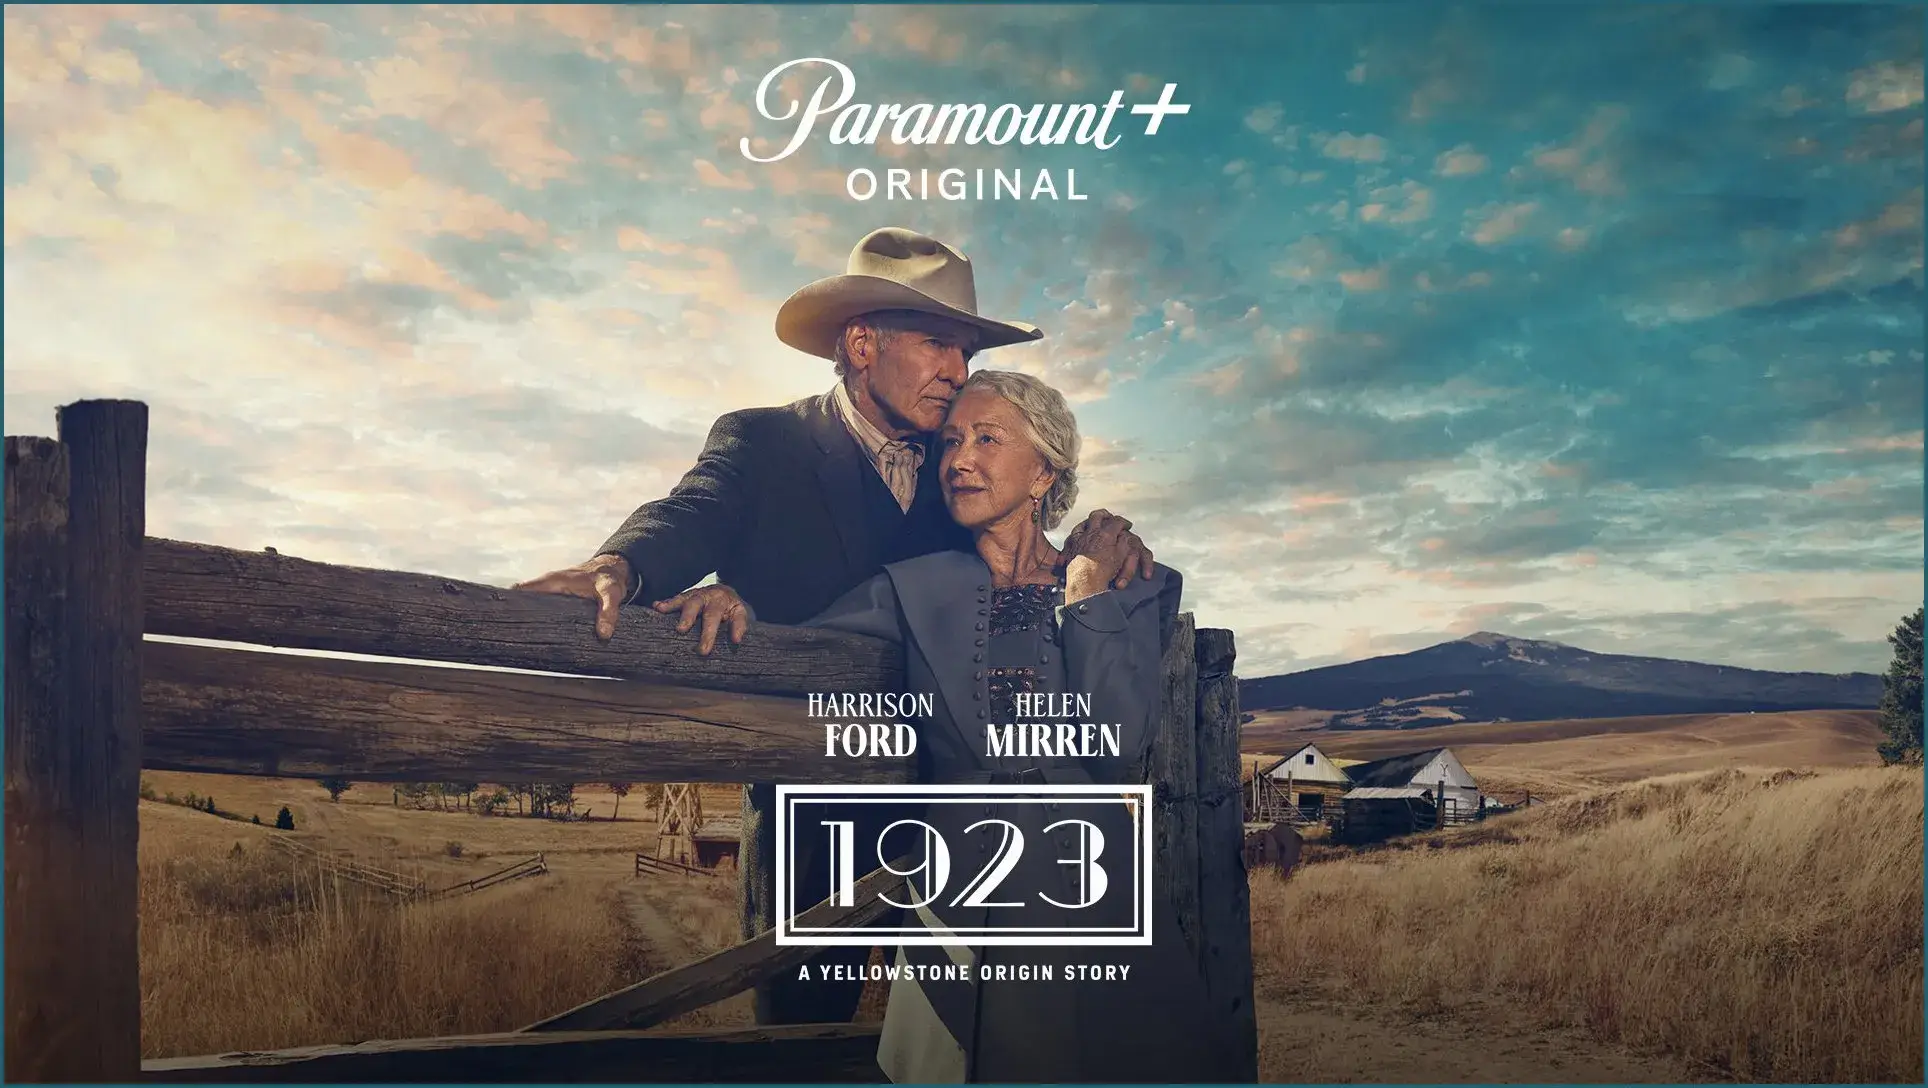 How to Watch Paramount+ 1923 Season 1 Episode 1 Online